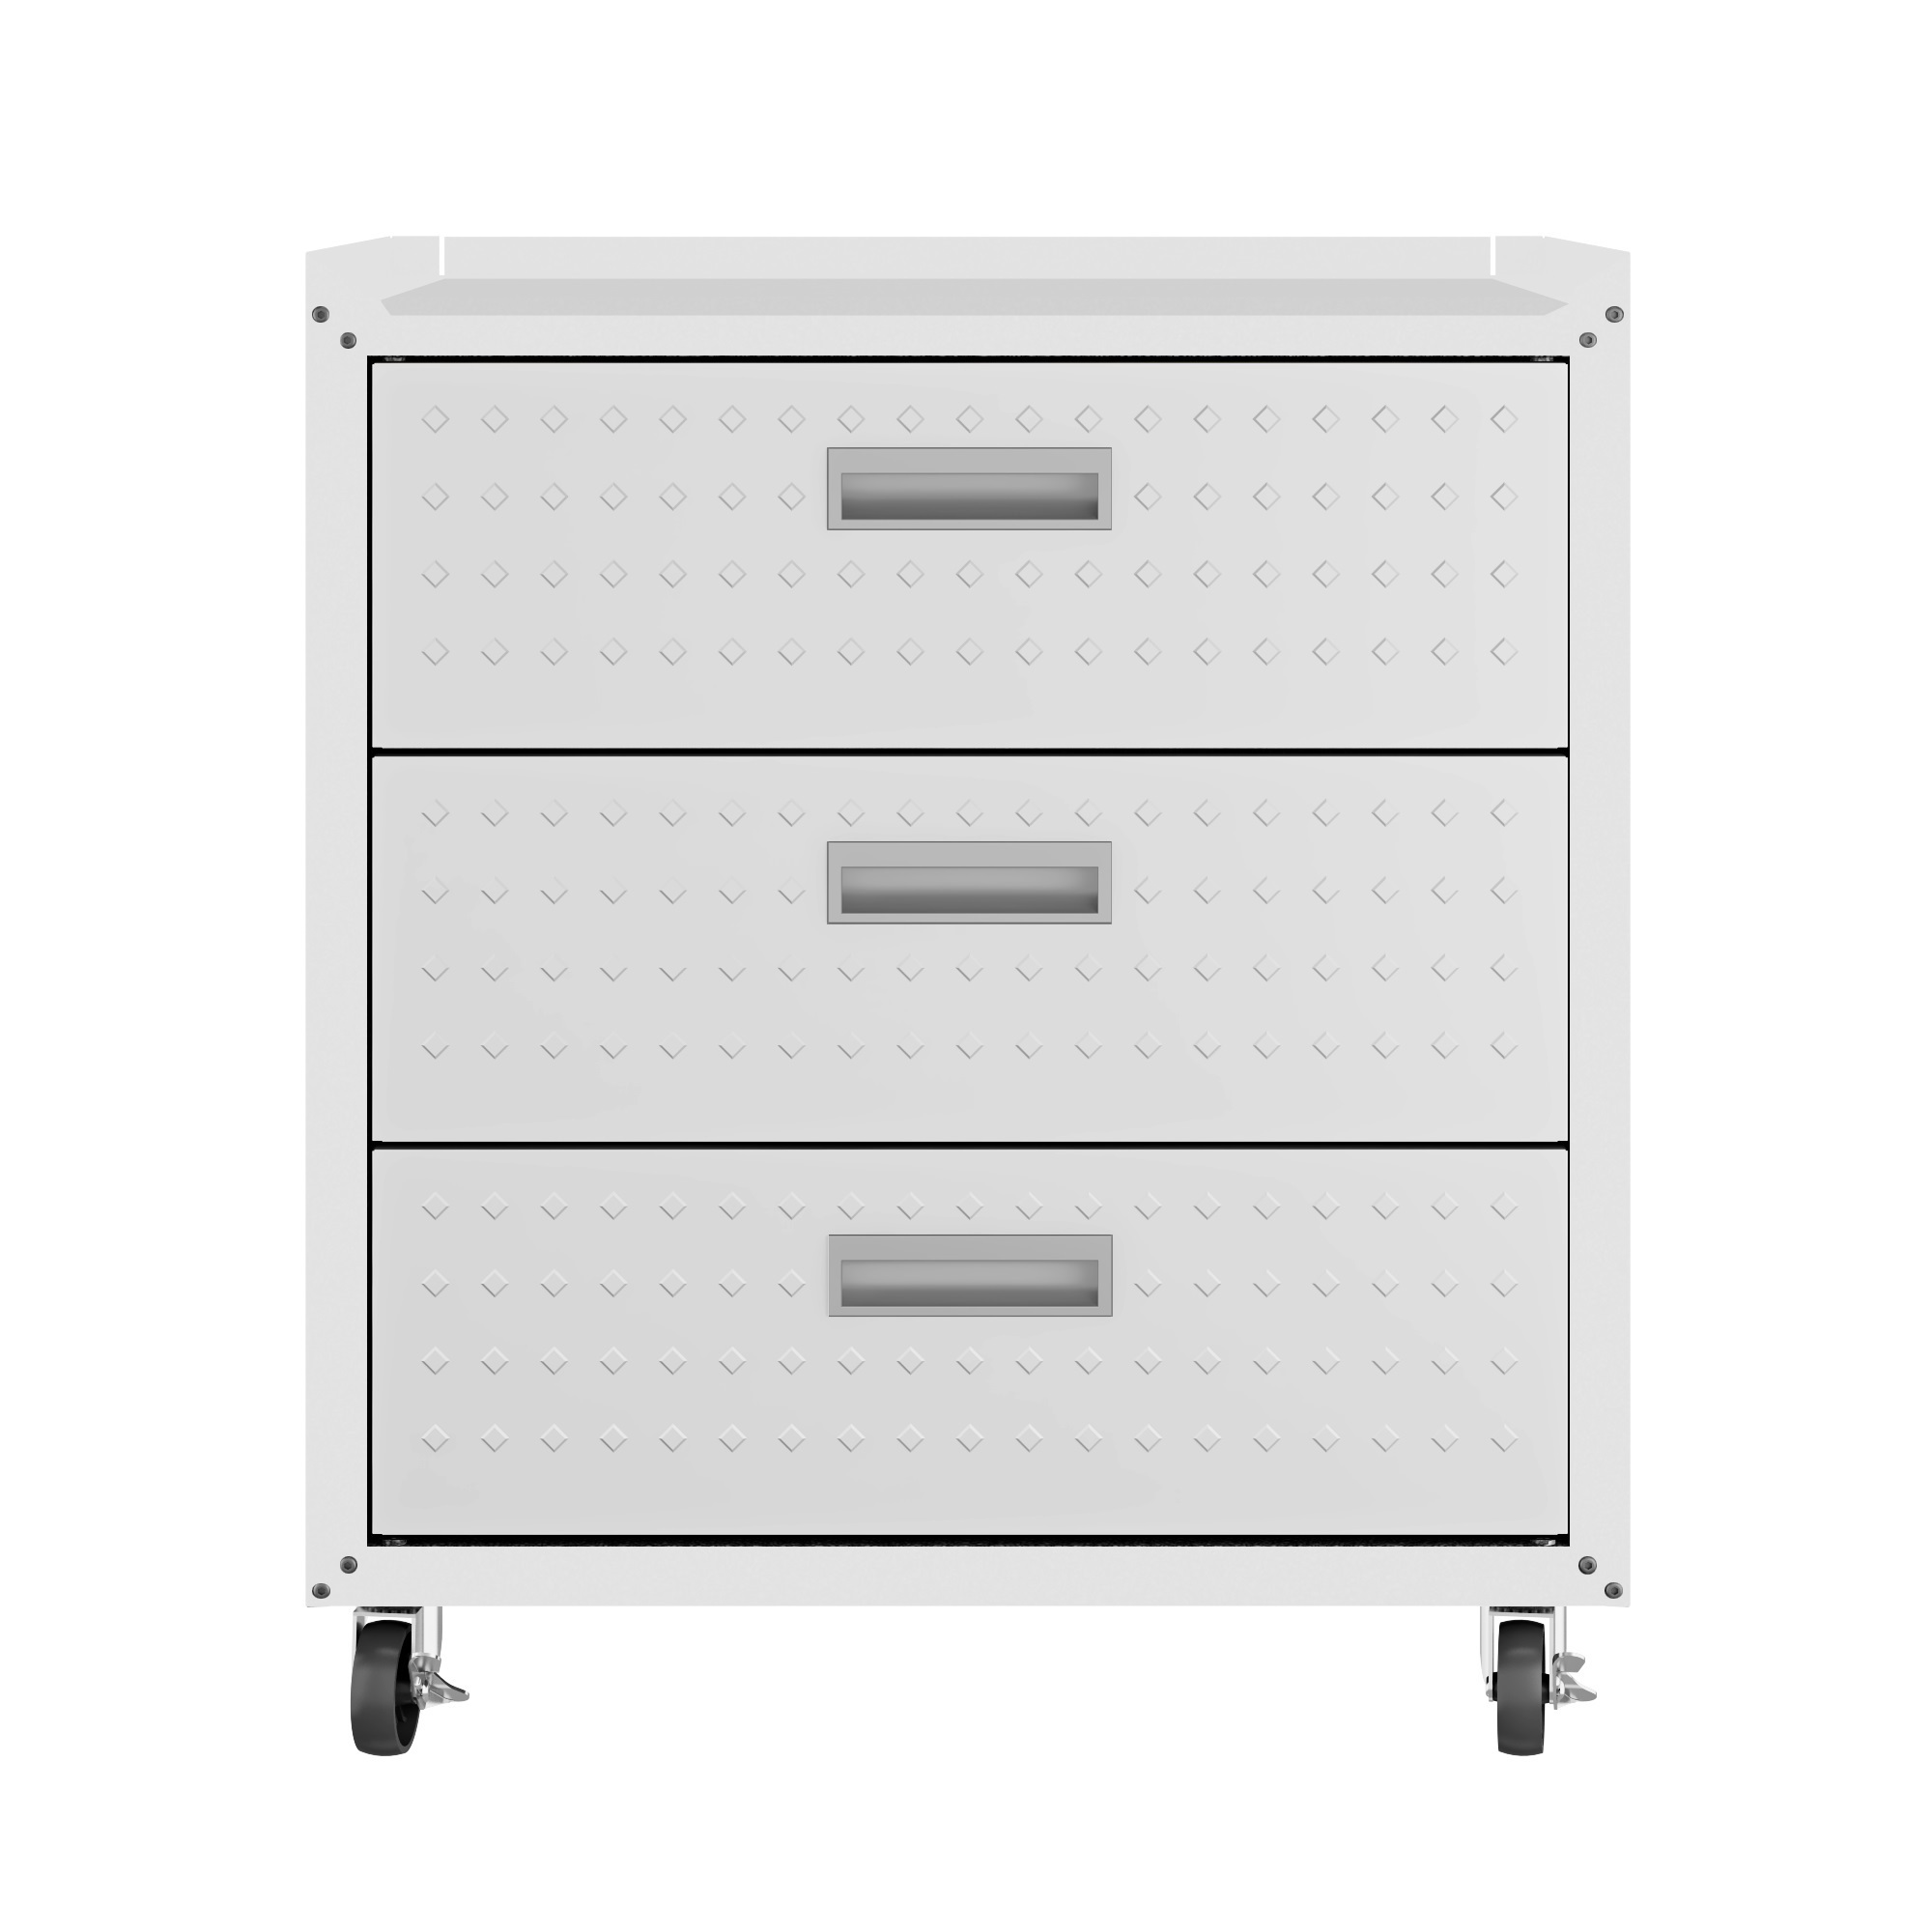 Manhattan Comfort, Fortress Mobile Garage Drawer Chest in White, Height 32.1 in, Width 30.3 in, Color White, Model 4GMCC